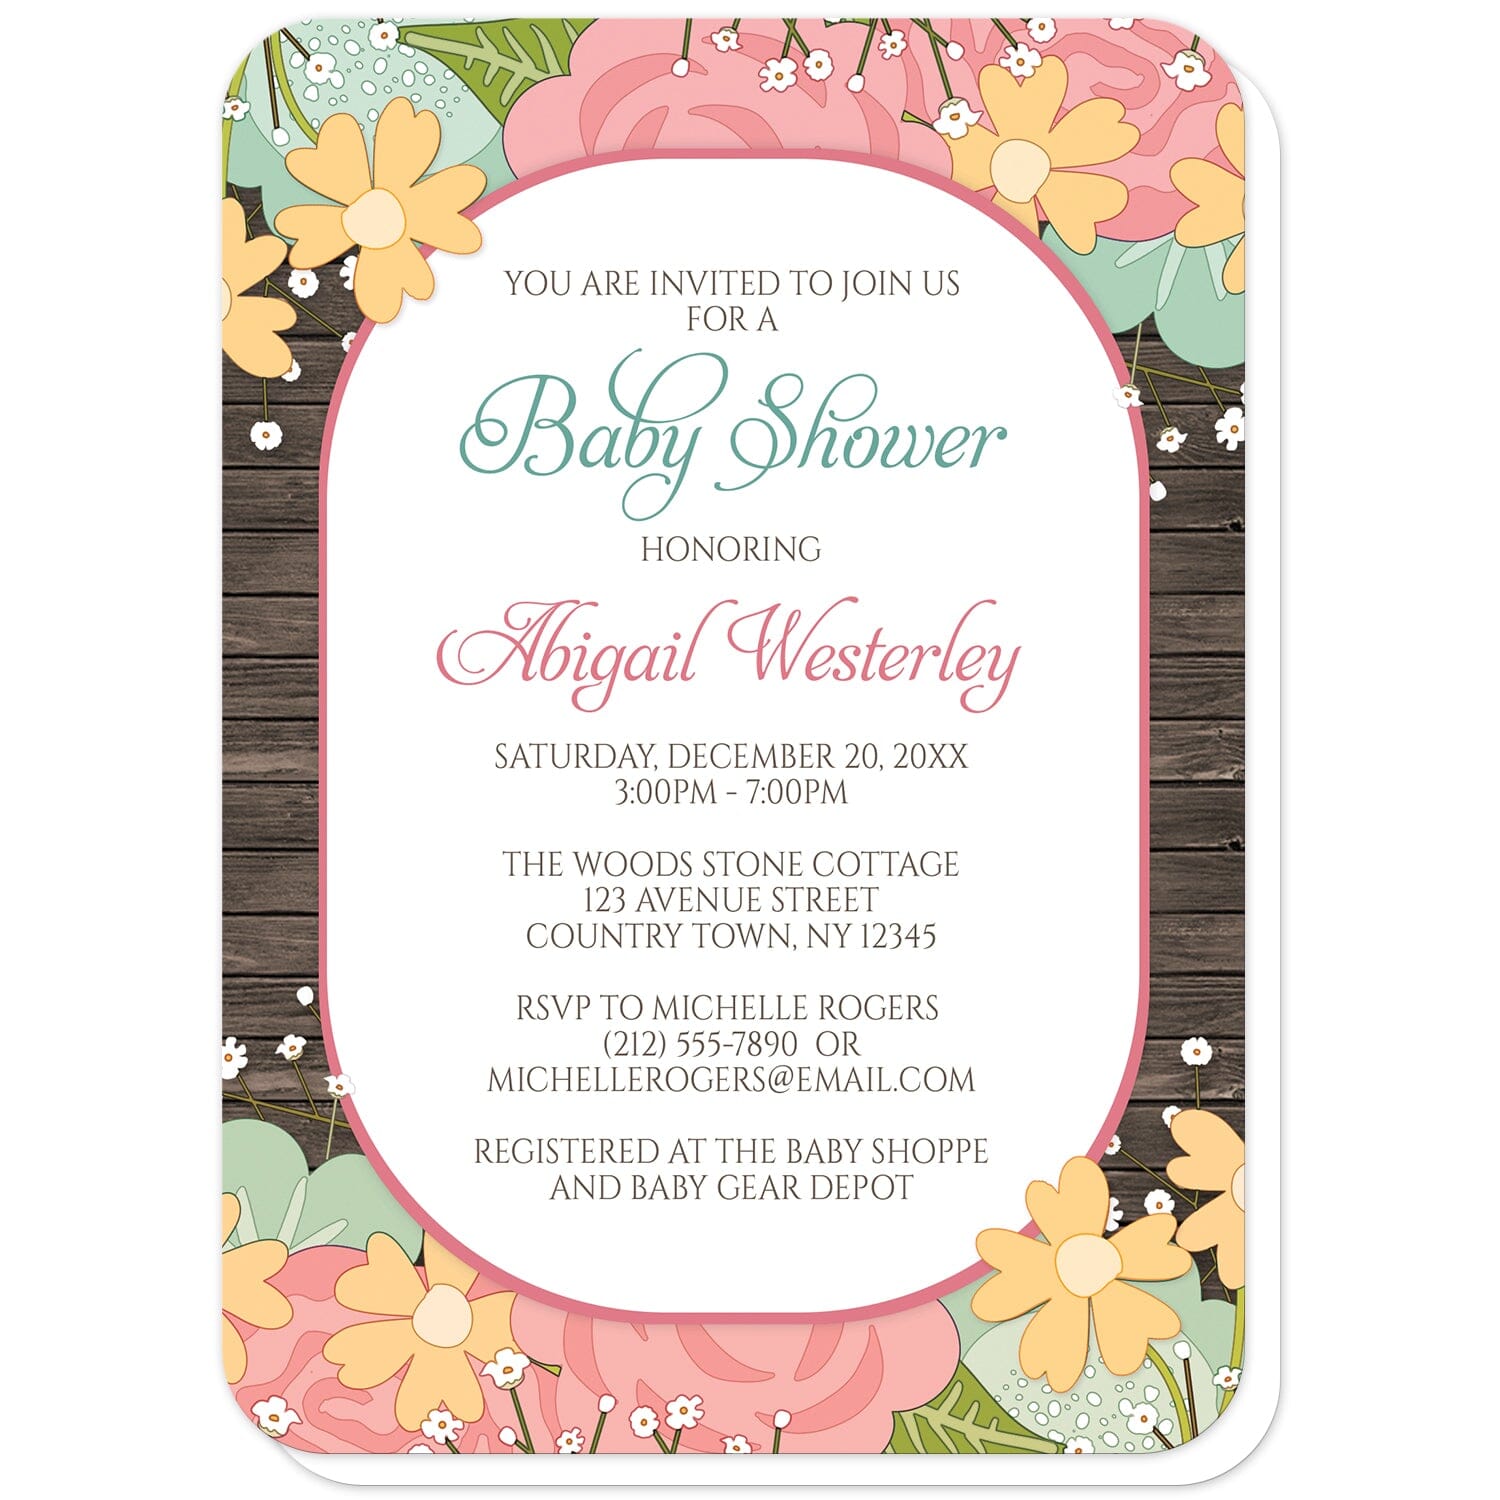 Summer Floral Wood Rustic Baby Shower Invitations (with rounded corners) at Artistically Invited. Flowery and sweet summer floral wood rustic baby shower invitations designed with a pink and teal floral theme with orange flowers, green leaves, and baby's breath along the top and bottom of the invitations. Your personalized baby shower celebration details are custom printed in teal, pink, and brown on white in the center over a rustic wood background between the flowers. 